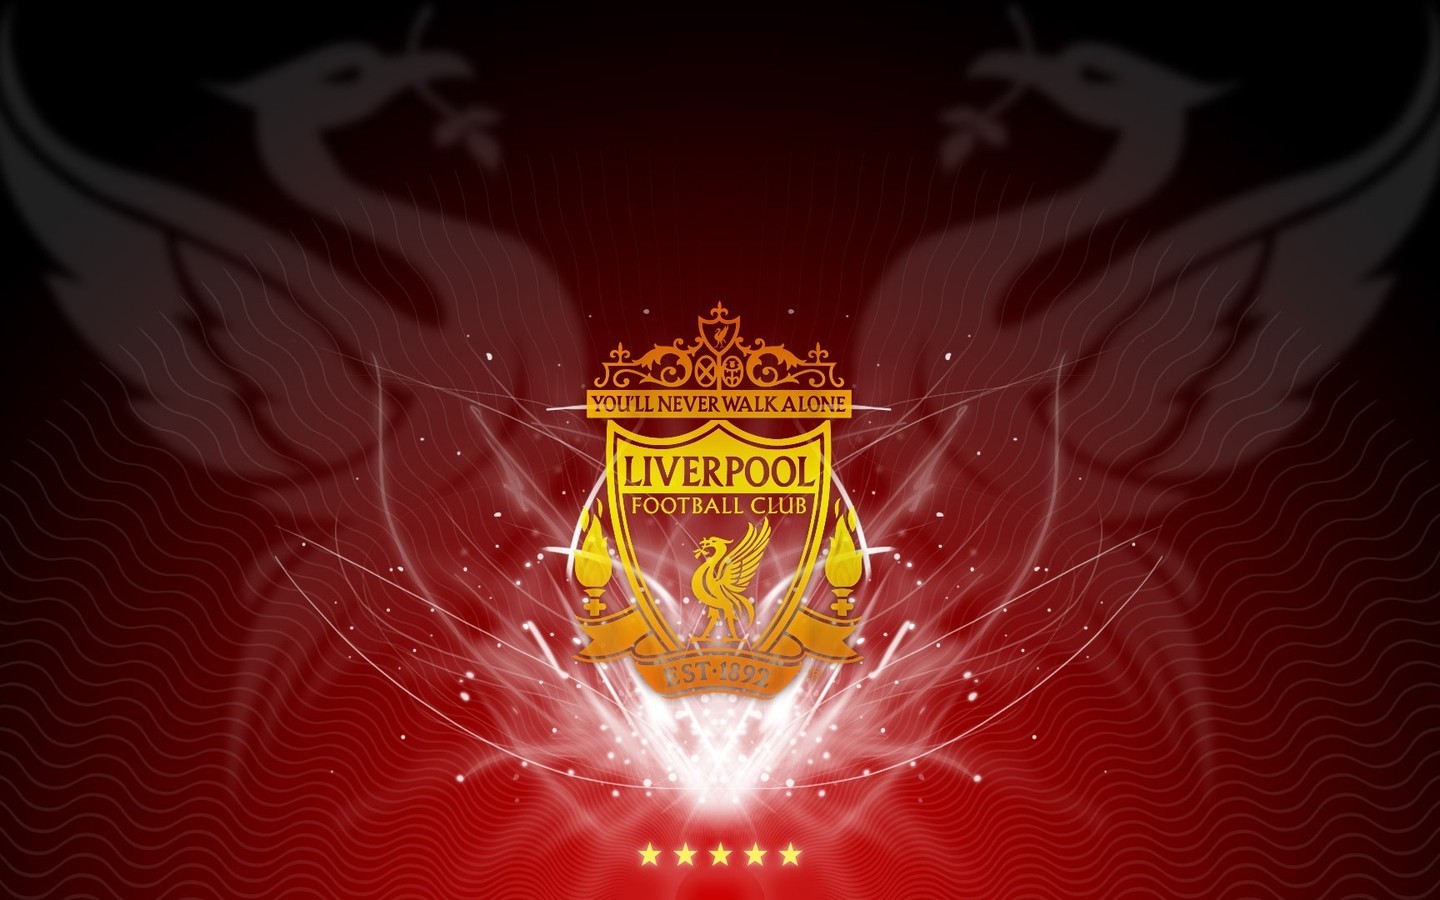 football, liverpool, brands, logos, sports, red